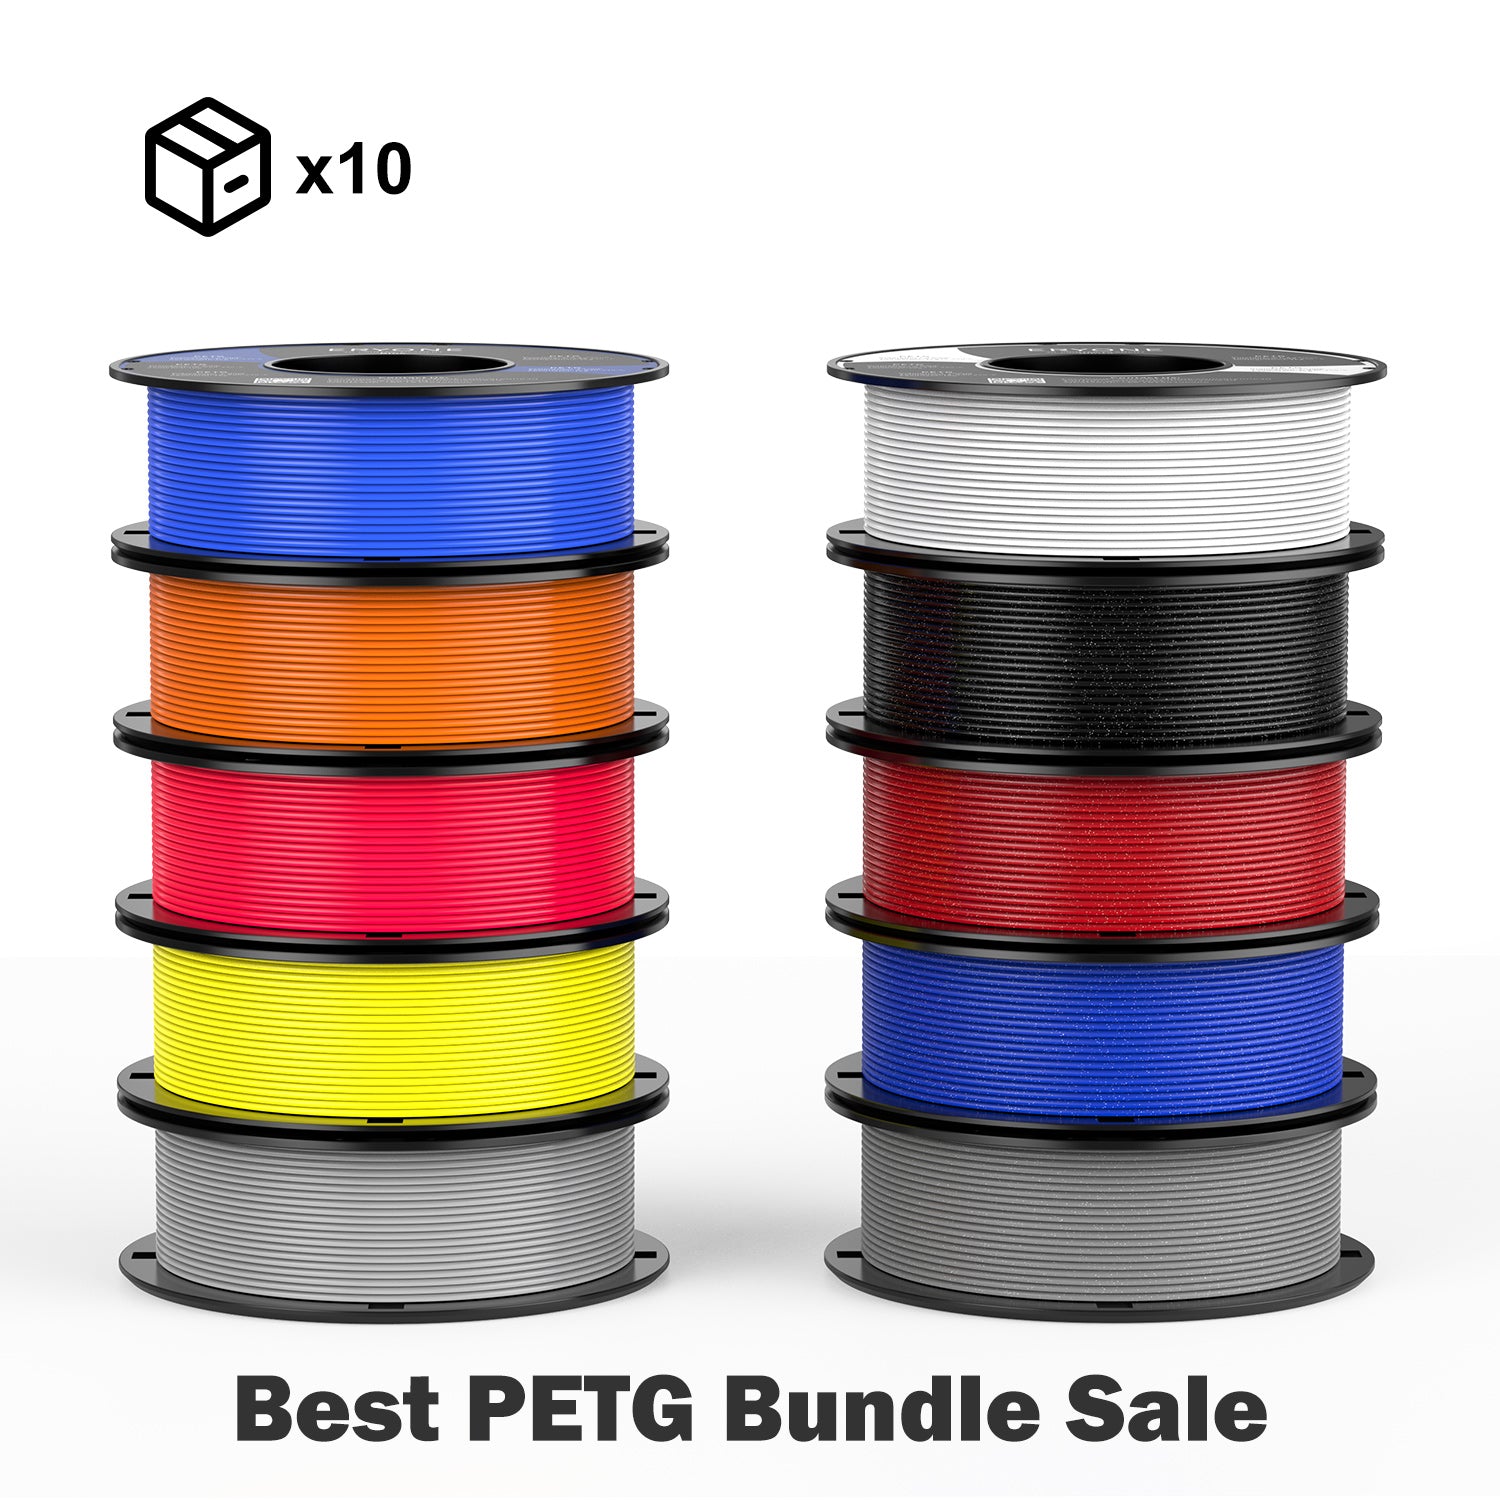 Buy 3D Printer Filaments PETG - Best price with free shipping offer